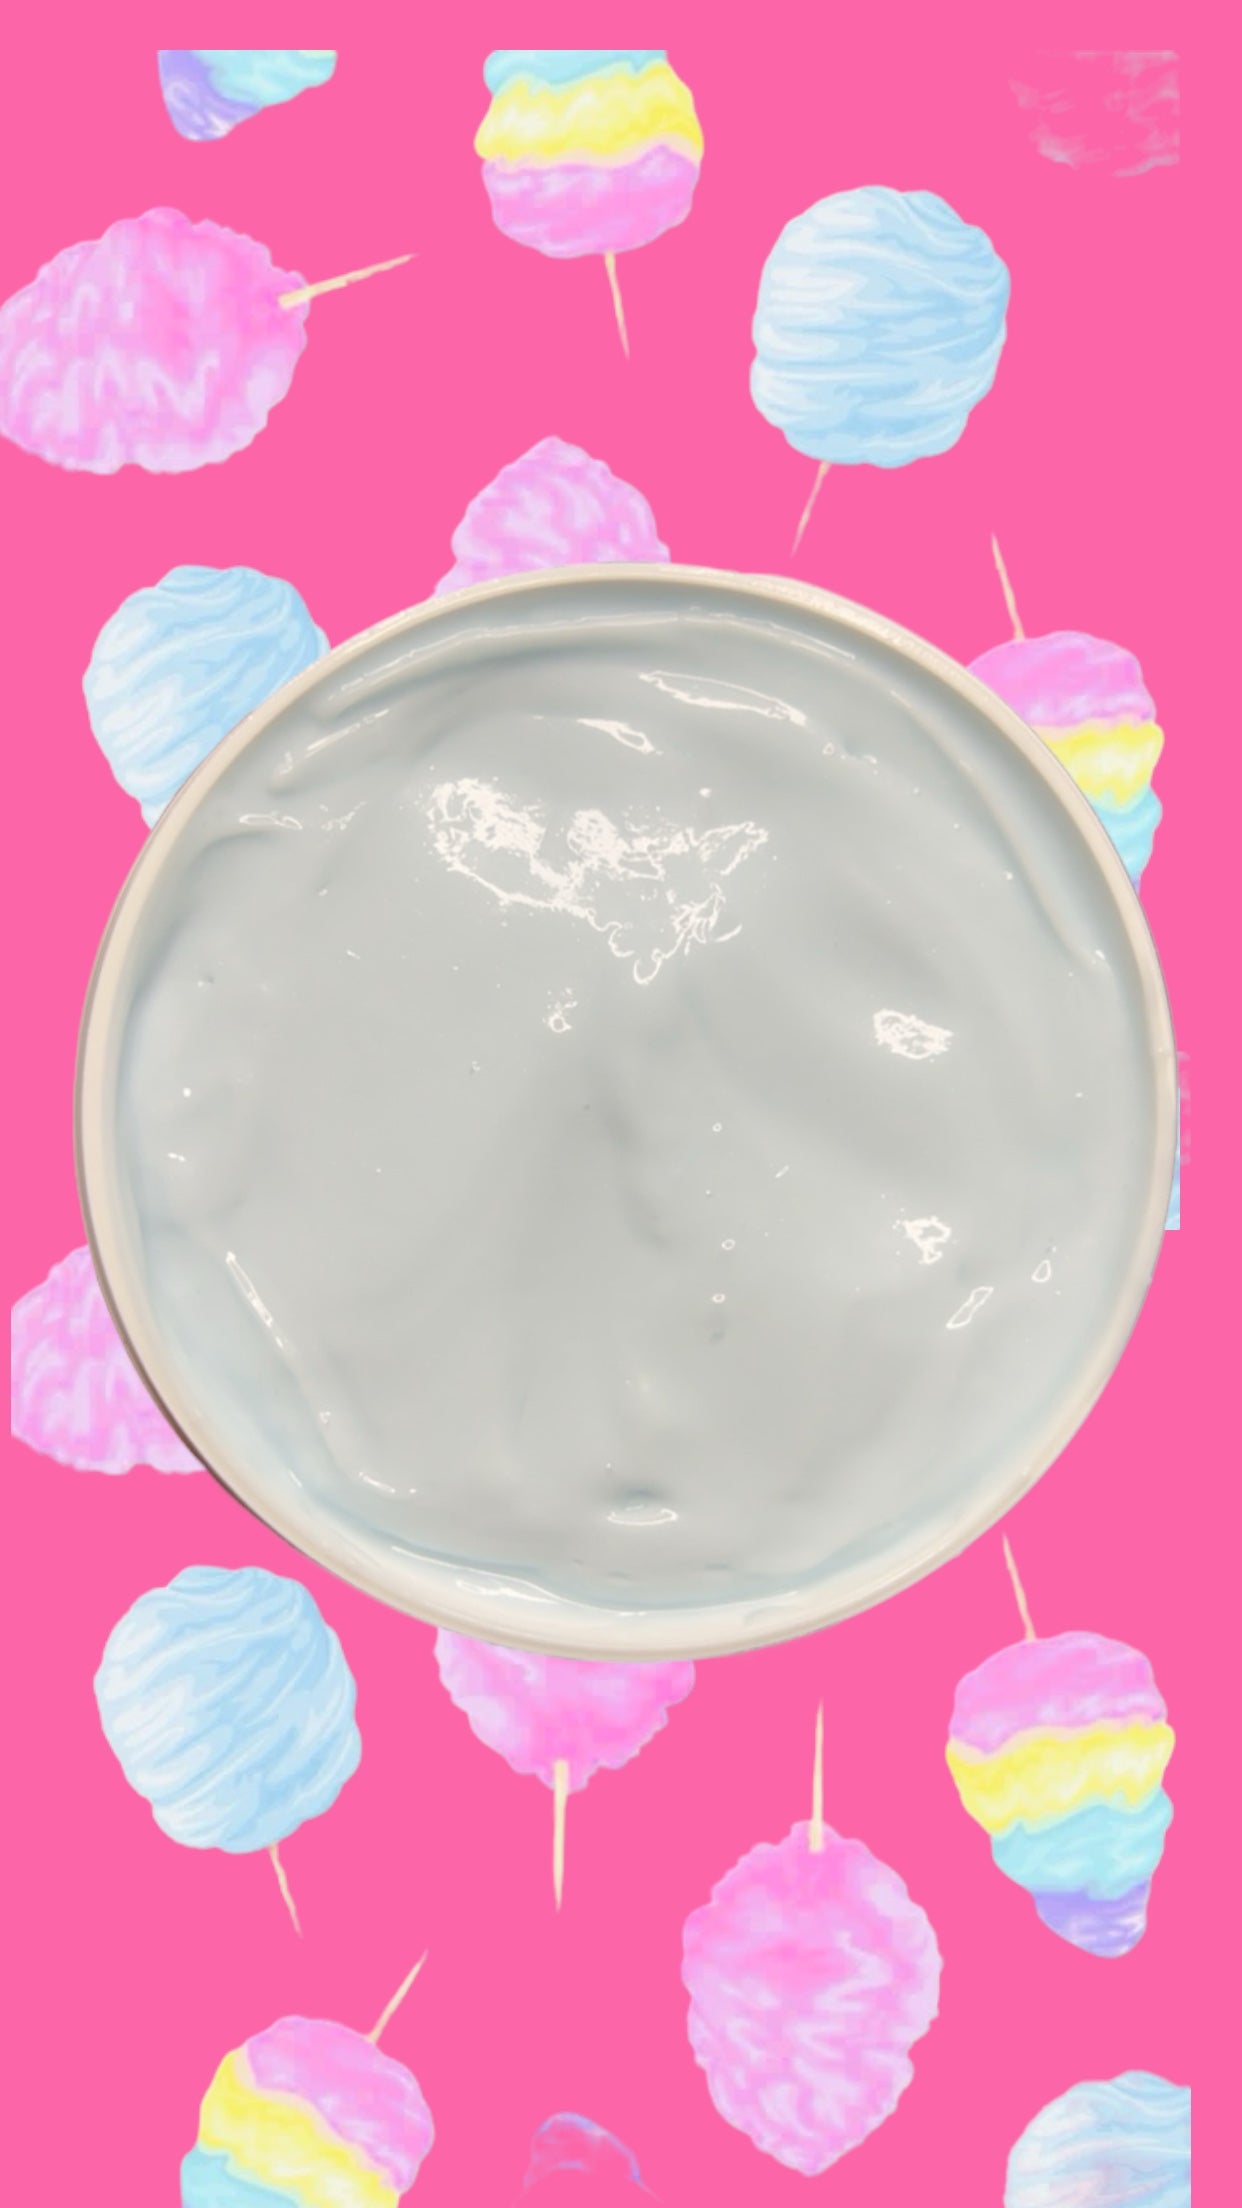 “Cotton Candy” 🍭 🍬           BODY GREASE